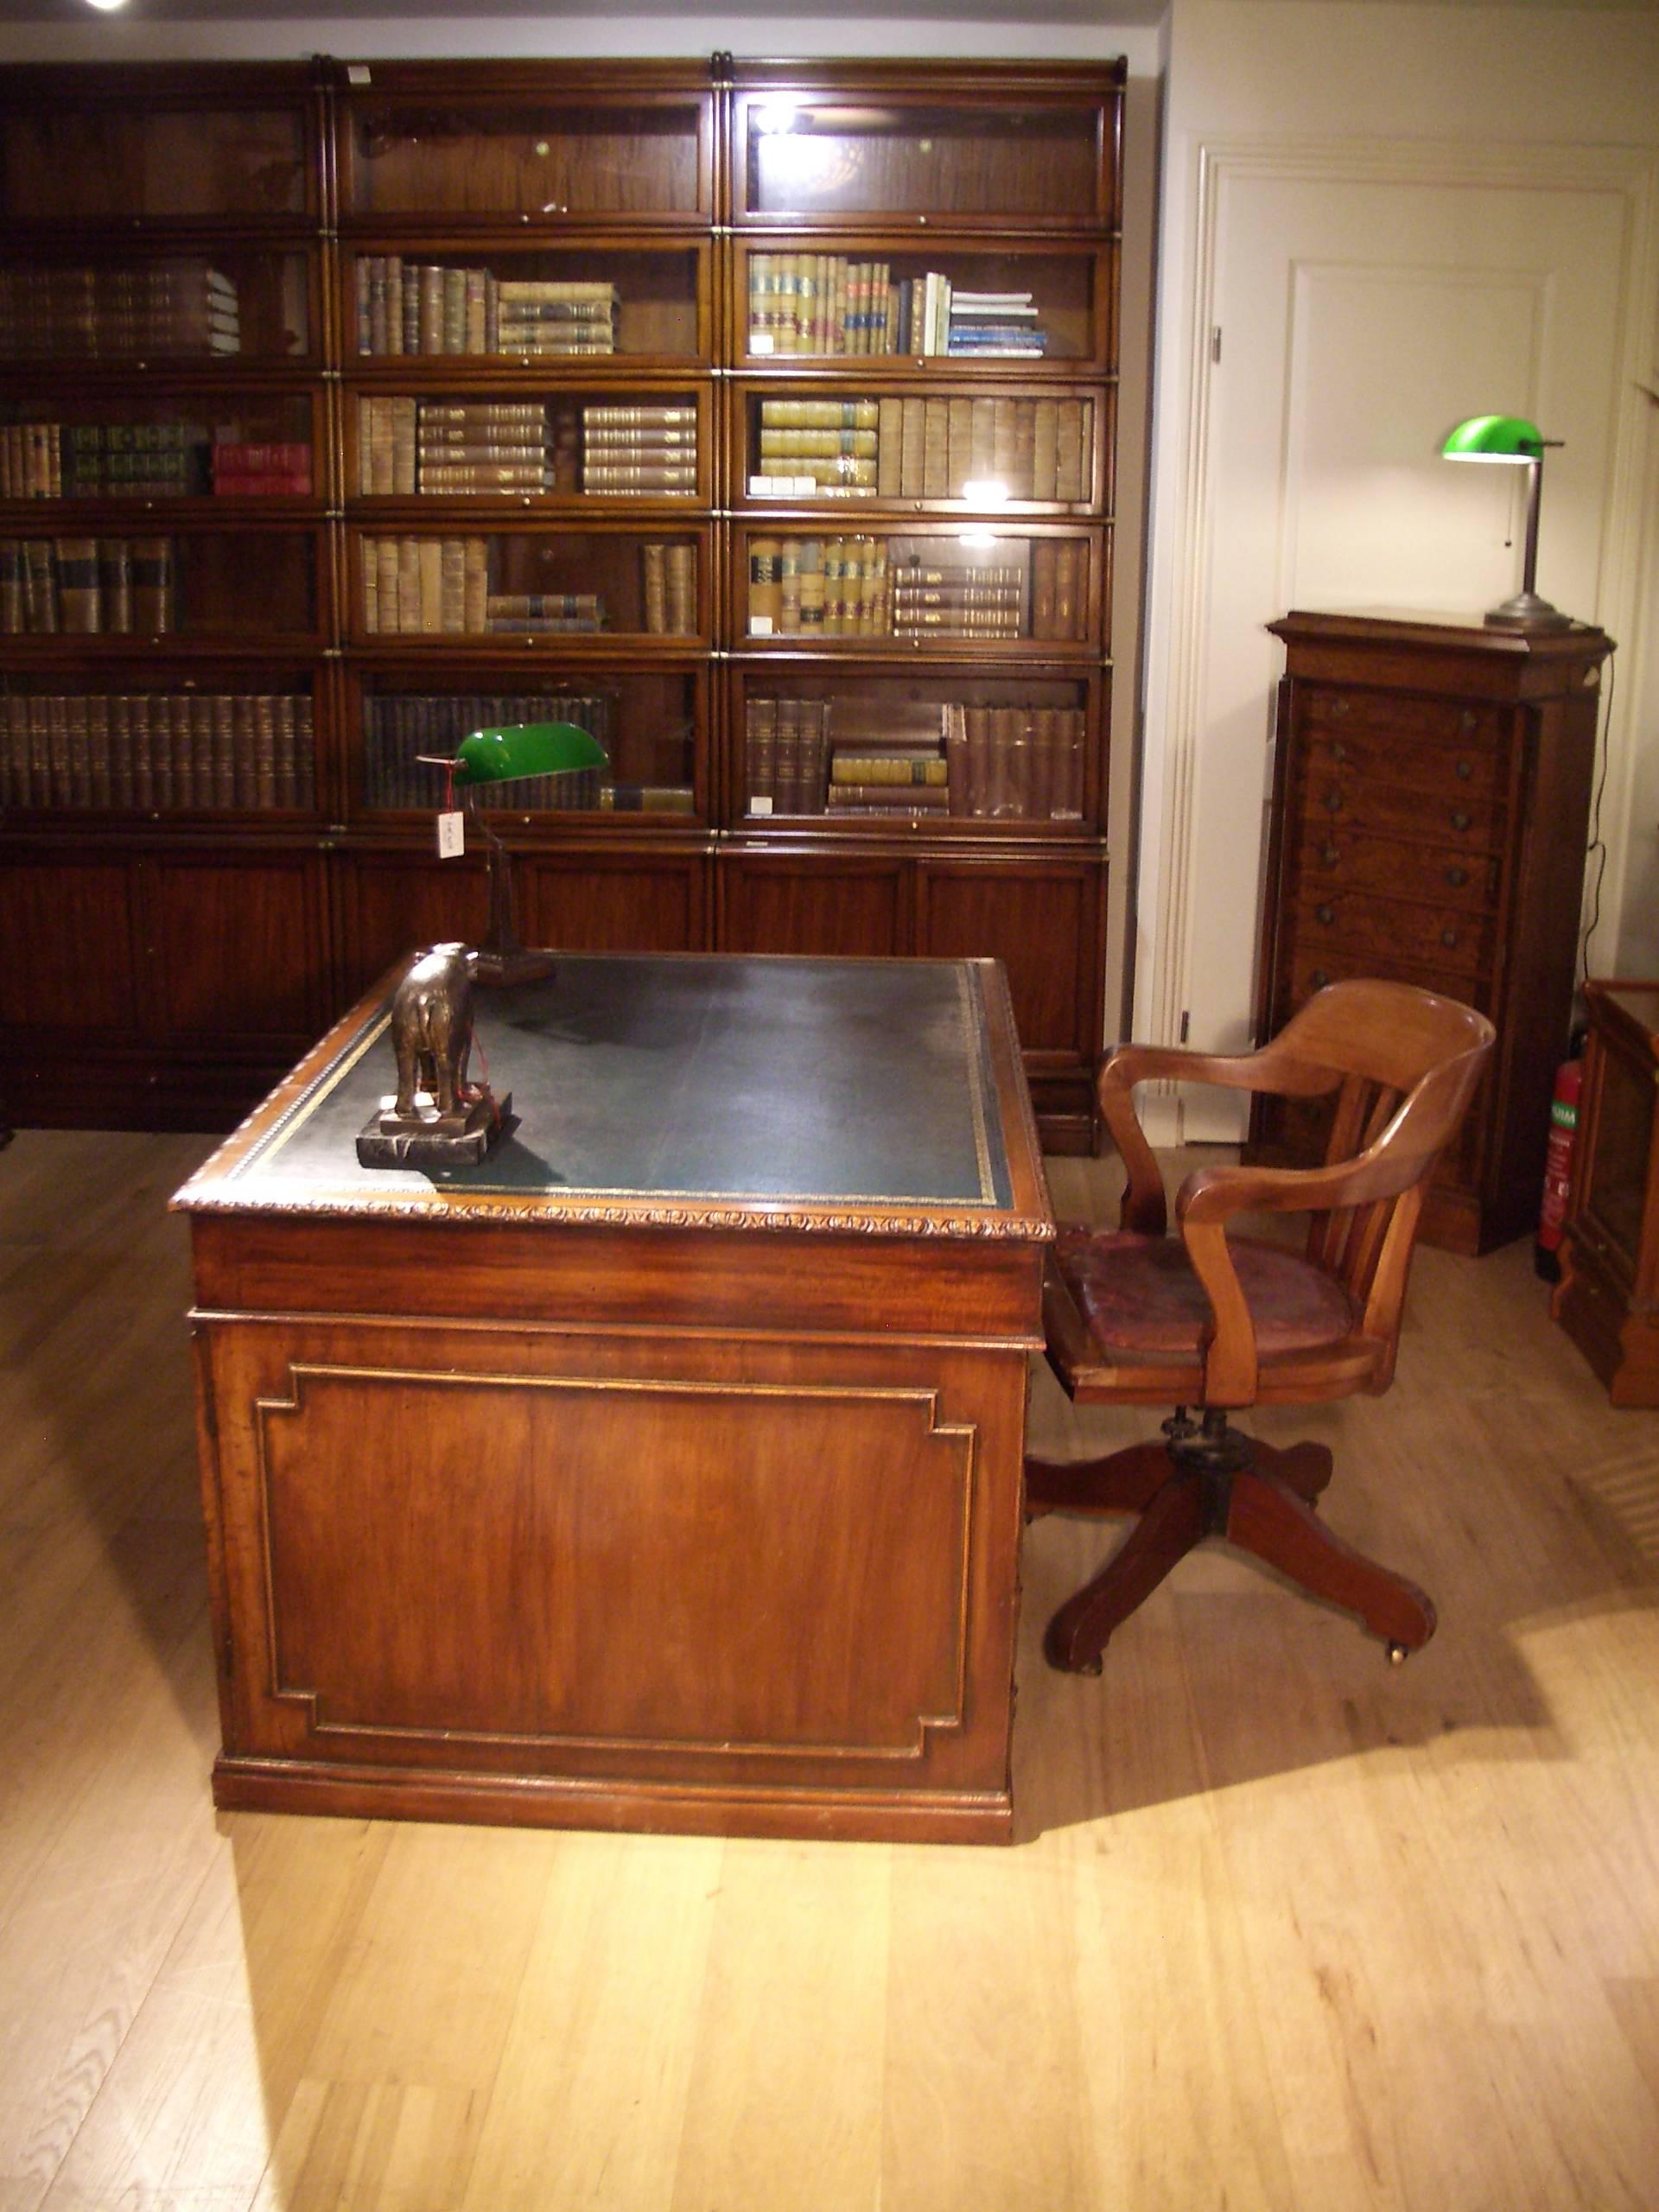 Original partner desk with beautiful character. Compact and very useful size.
The desk has a beautifully aged patina. One side has 11 drawers, the other side has three drawers and two cupboards.
Entirely made of massive mahogany. The total is in